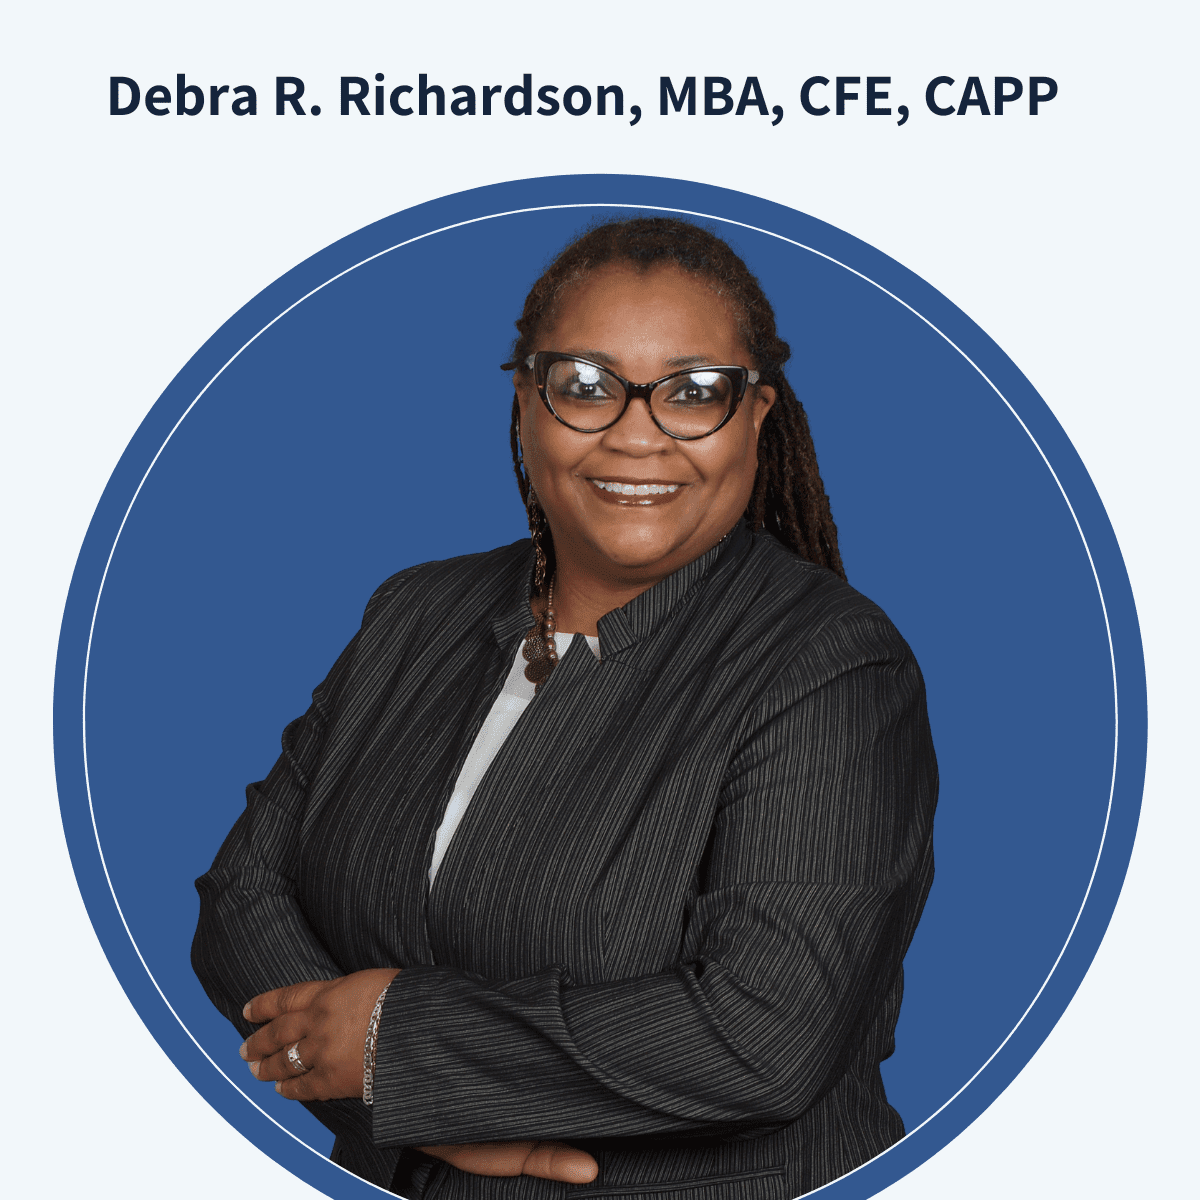 Welcome Debra R. Richardson, MBA, CFE, CAPP to the IFOL Education Team